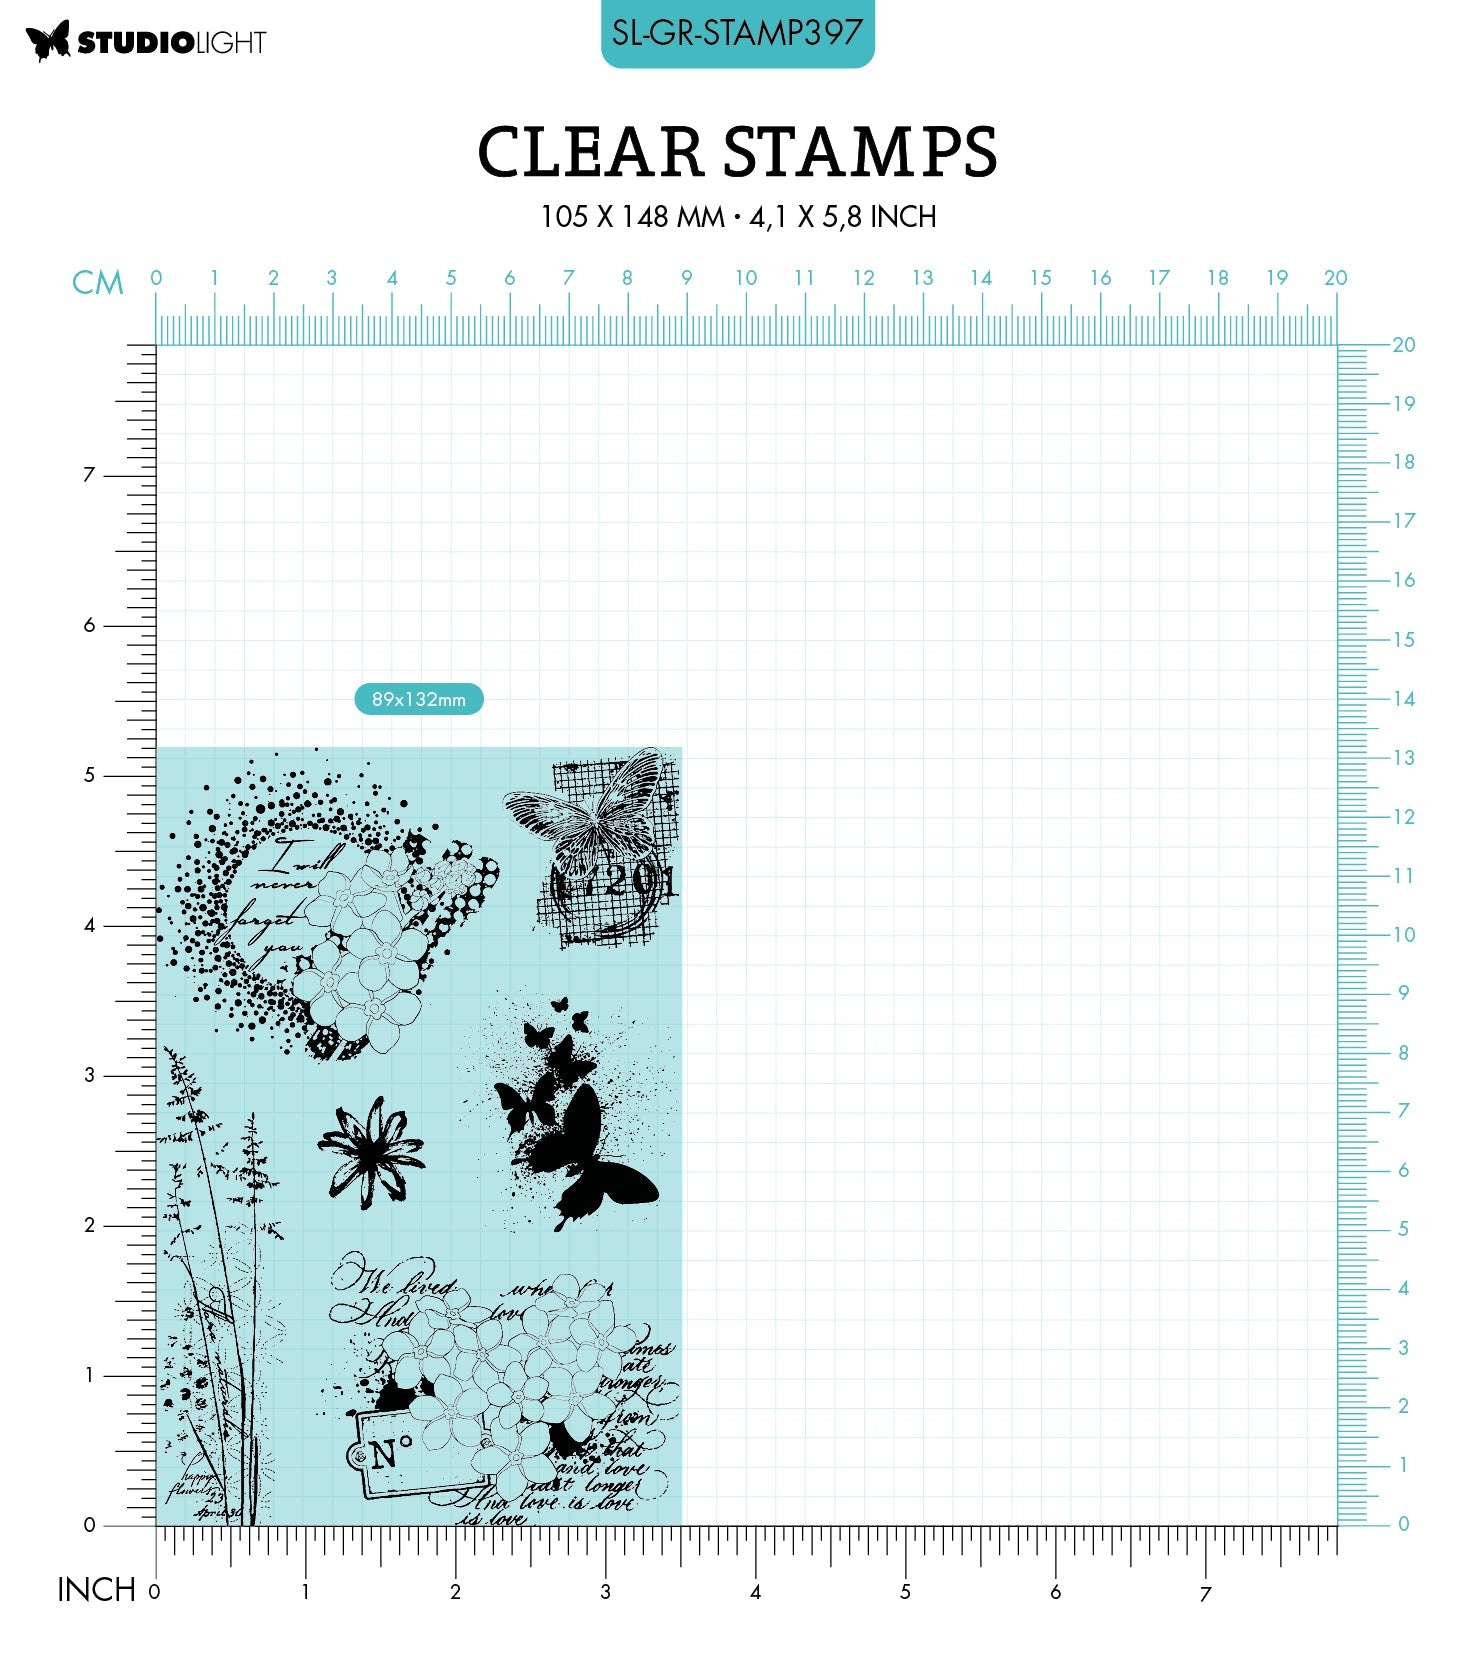 SL Clear Stamp Flowers And Butterfly Grunge Collection 89x132x3mm 6 PC nr.397